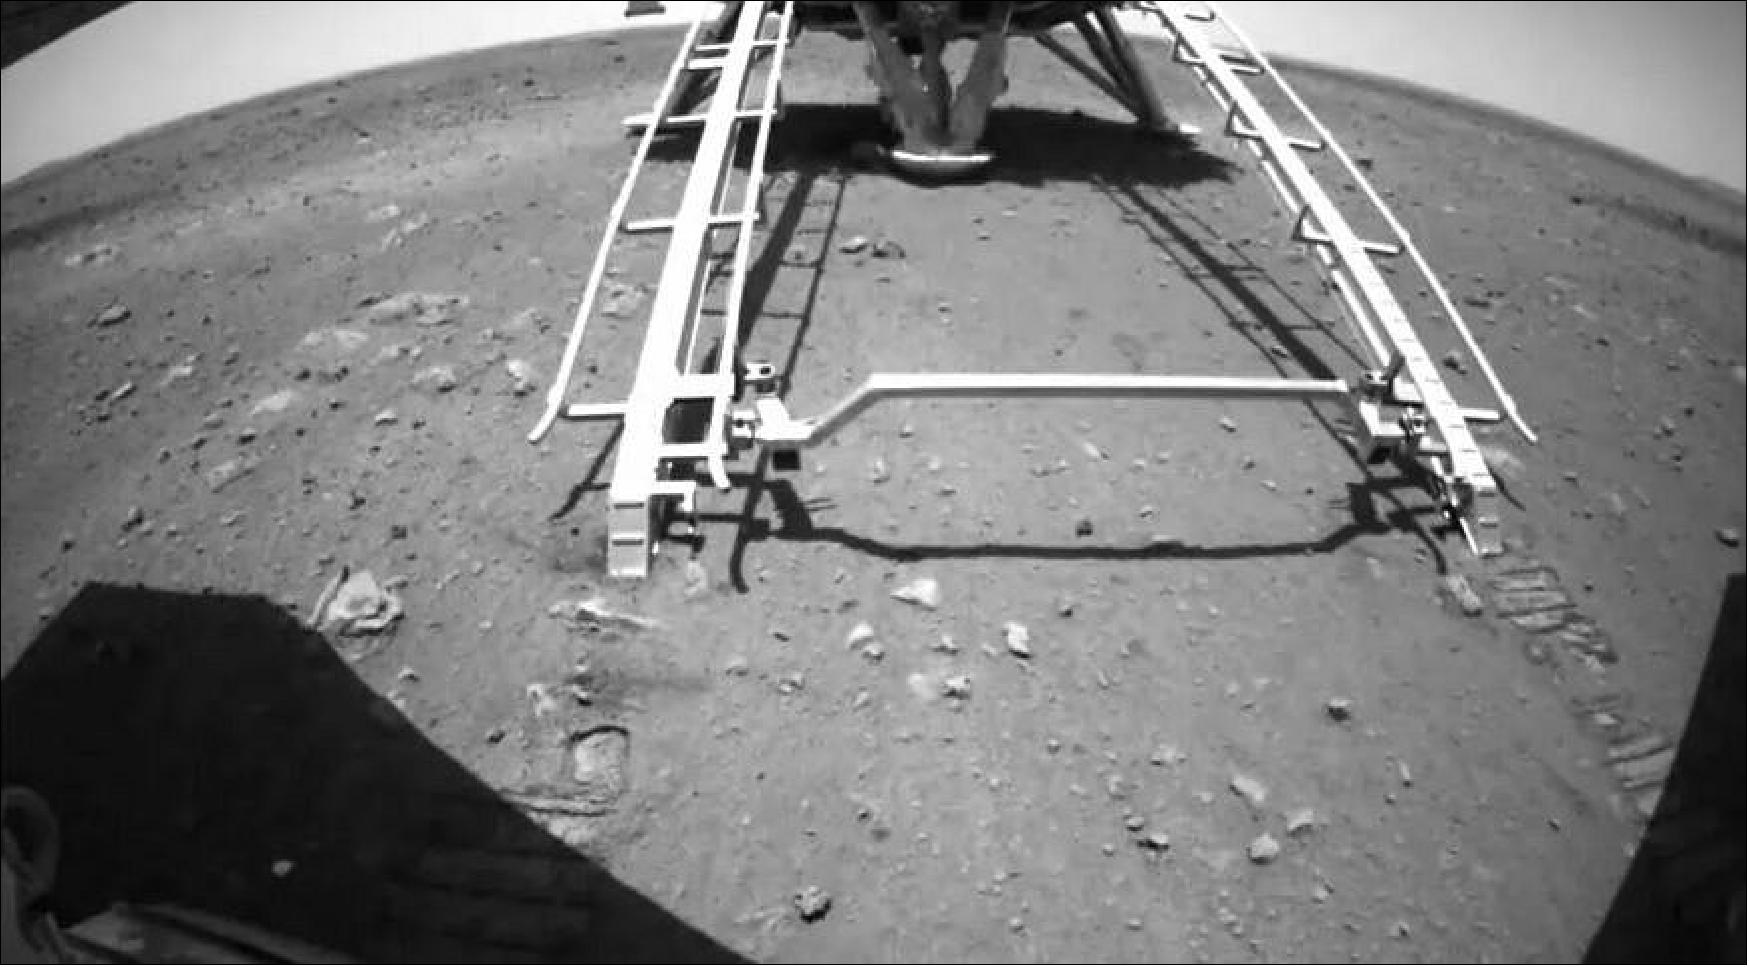 Figure 18: A rear hazard avoidance camera view from Zhurong after deployment from the lander late May 21 EDT, 2021 (image credit: CNSA/PEC)